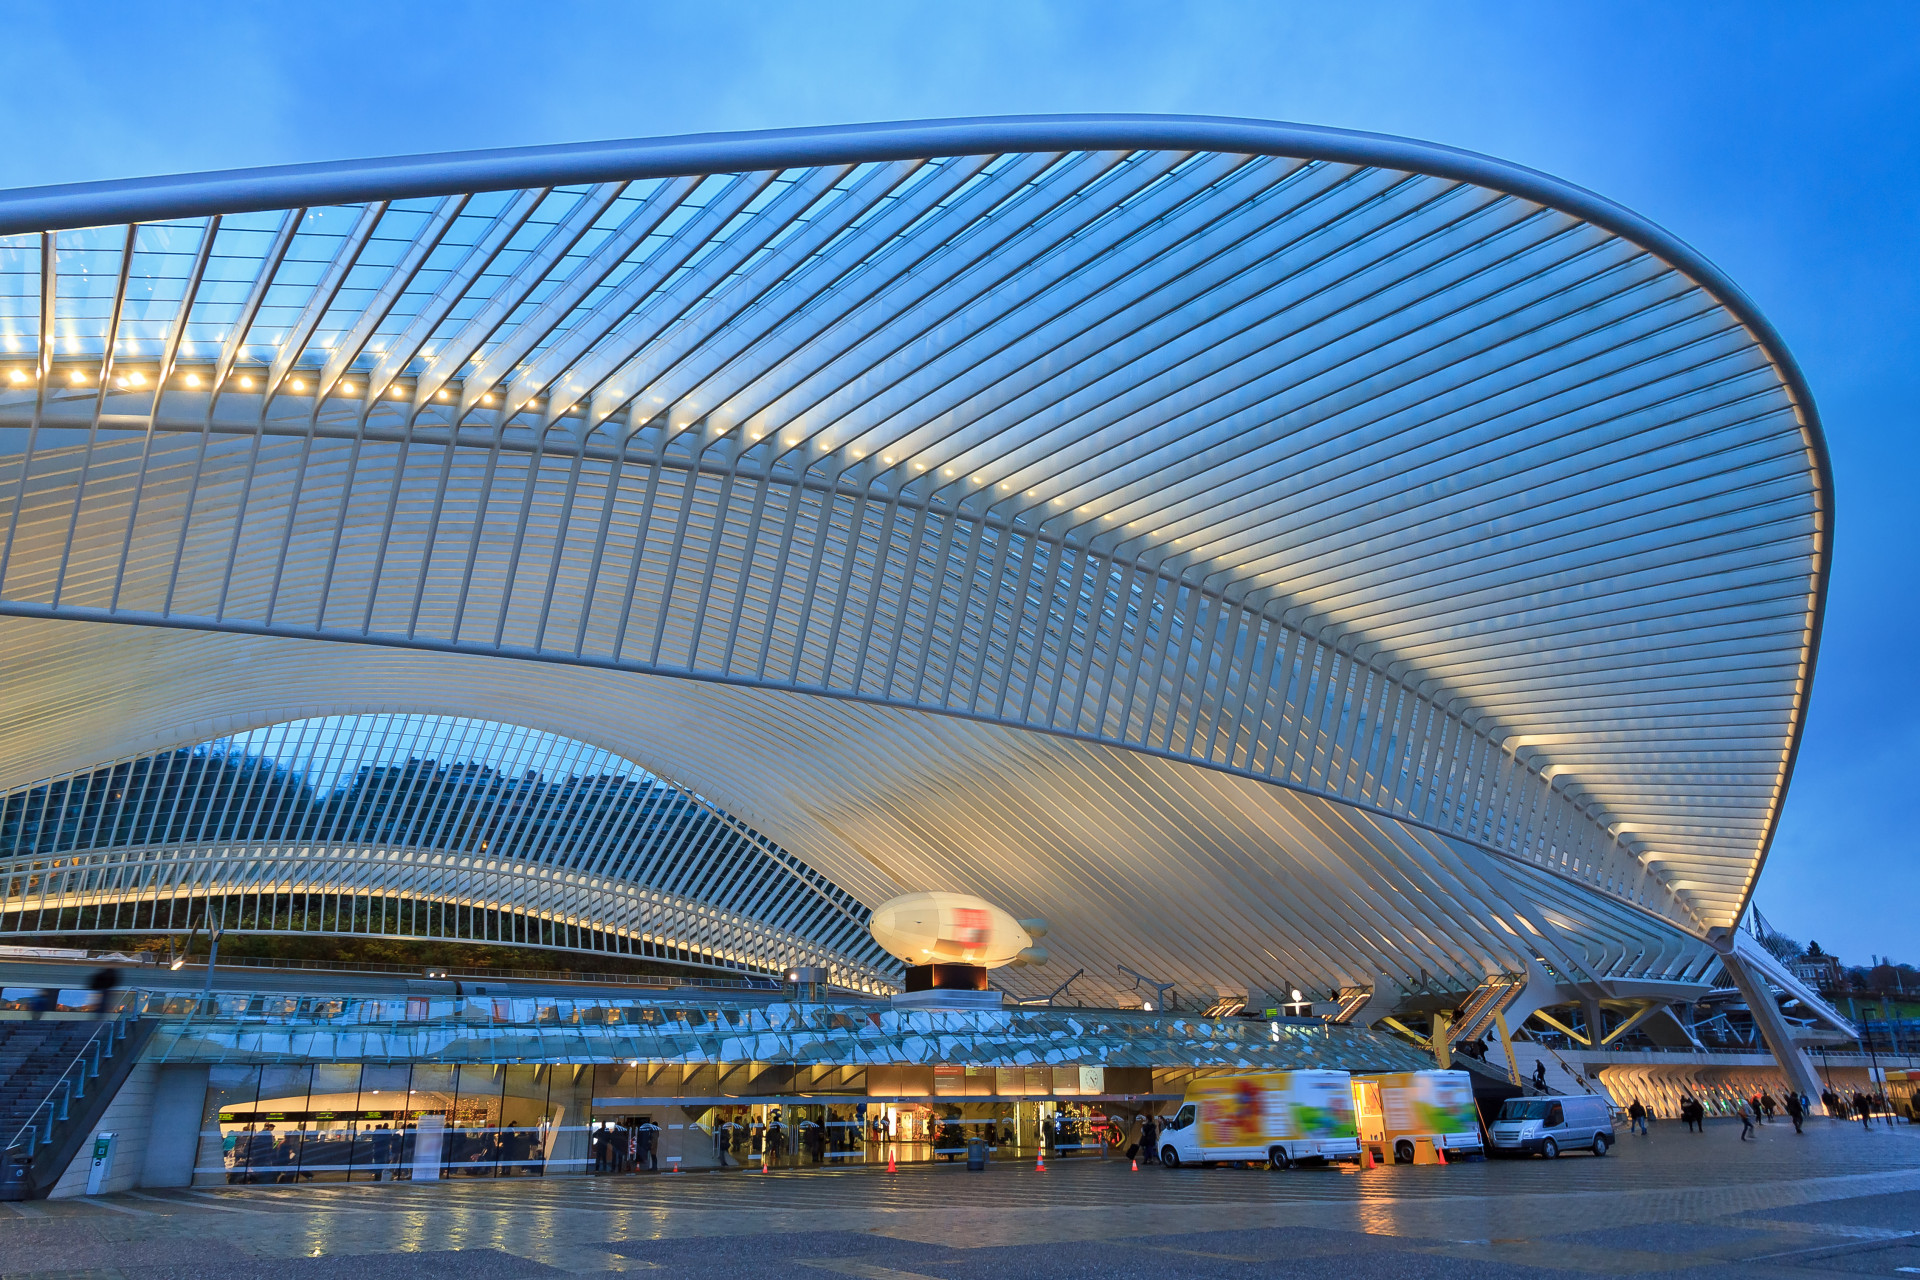 The epic railway station Liège-Guillemins is not only the biggest and most important station in Liège, it's also a real masterpiece. It was designed by Spanish architect Santiago Calatrava, who also designed the Bilbao Airport, the World Trade Center Transportation Hub, the Dubai Creek Tower, and many other impressive buildings.<p><a href="https://www.msn.com/en-us/community/channel/vid-7xx8mnucu55yw63we9va2gwr7uihbxwc68fxqp25x6tg4ftibpra?cvid=94631541bc0f4f89bfd59158d696ad7e">Follow us and access great exclusive content every day</a></p>